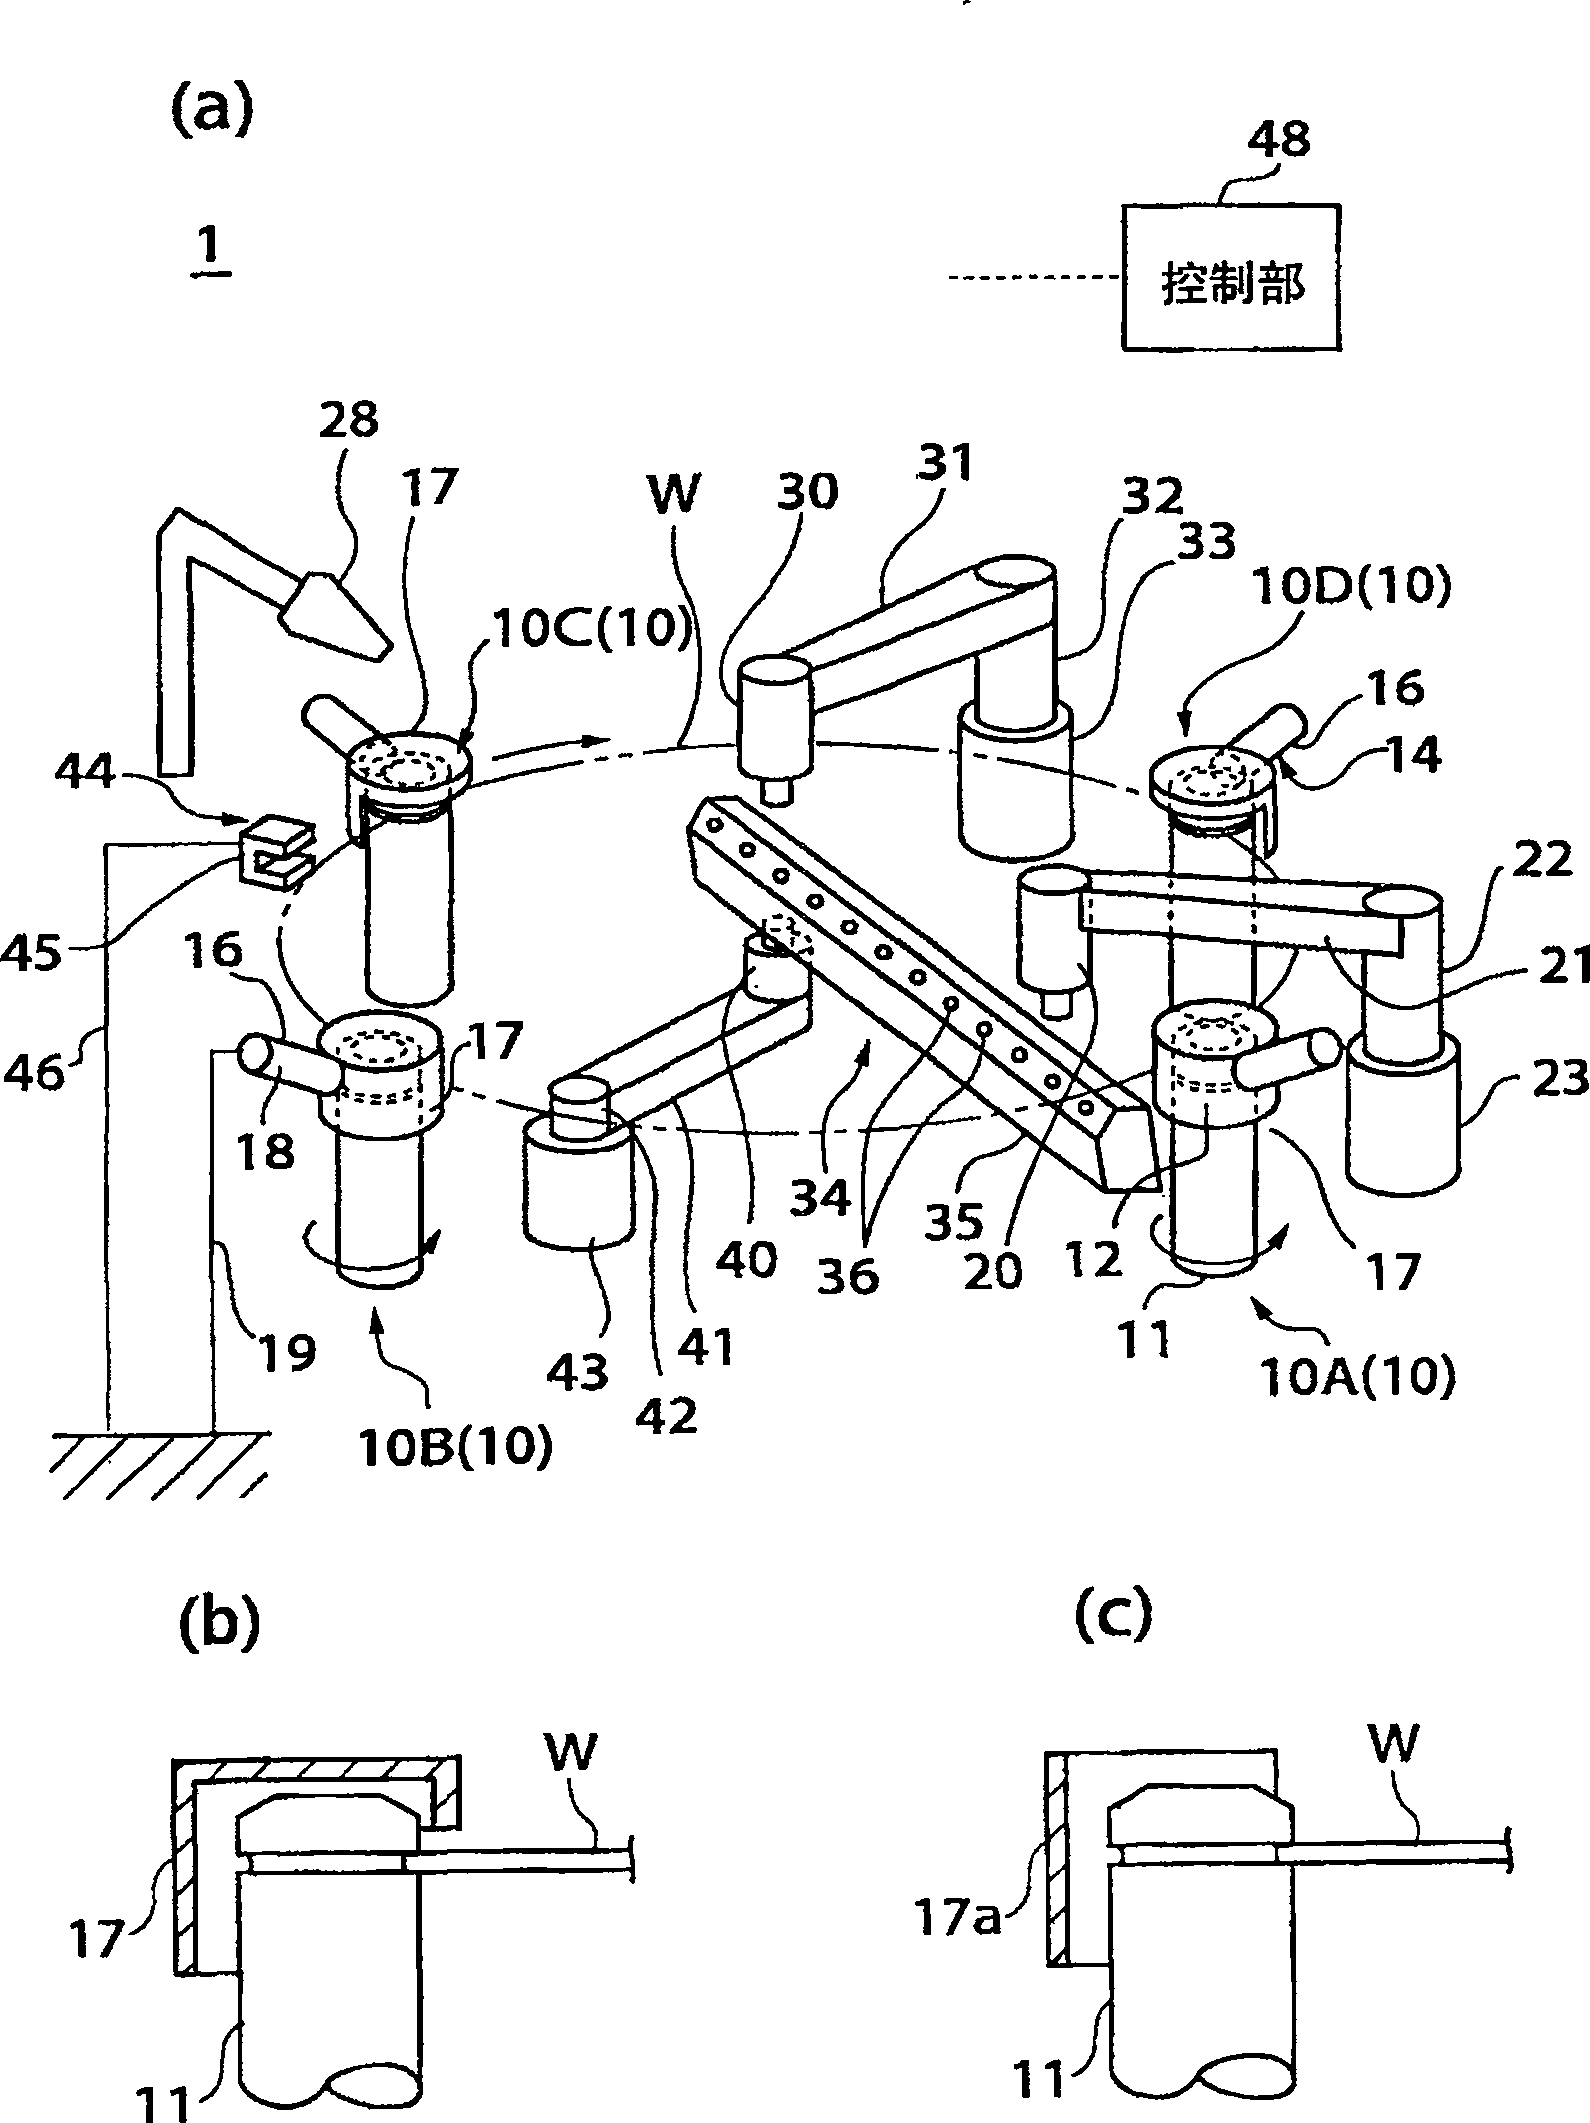 Substrate processing method, substrate processing apparatus and control program